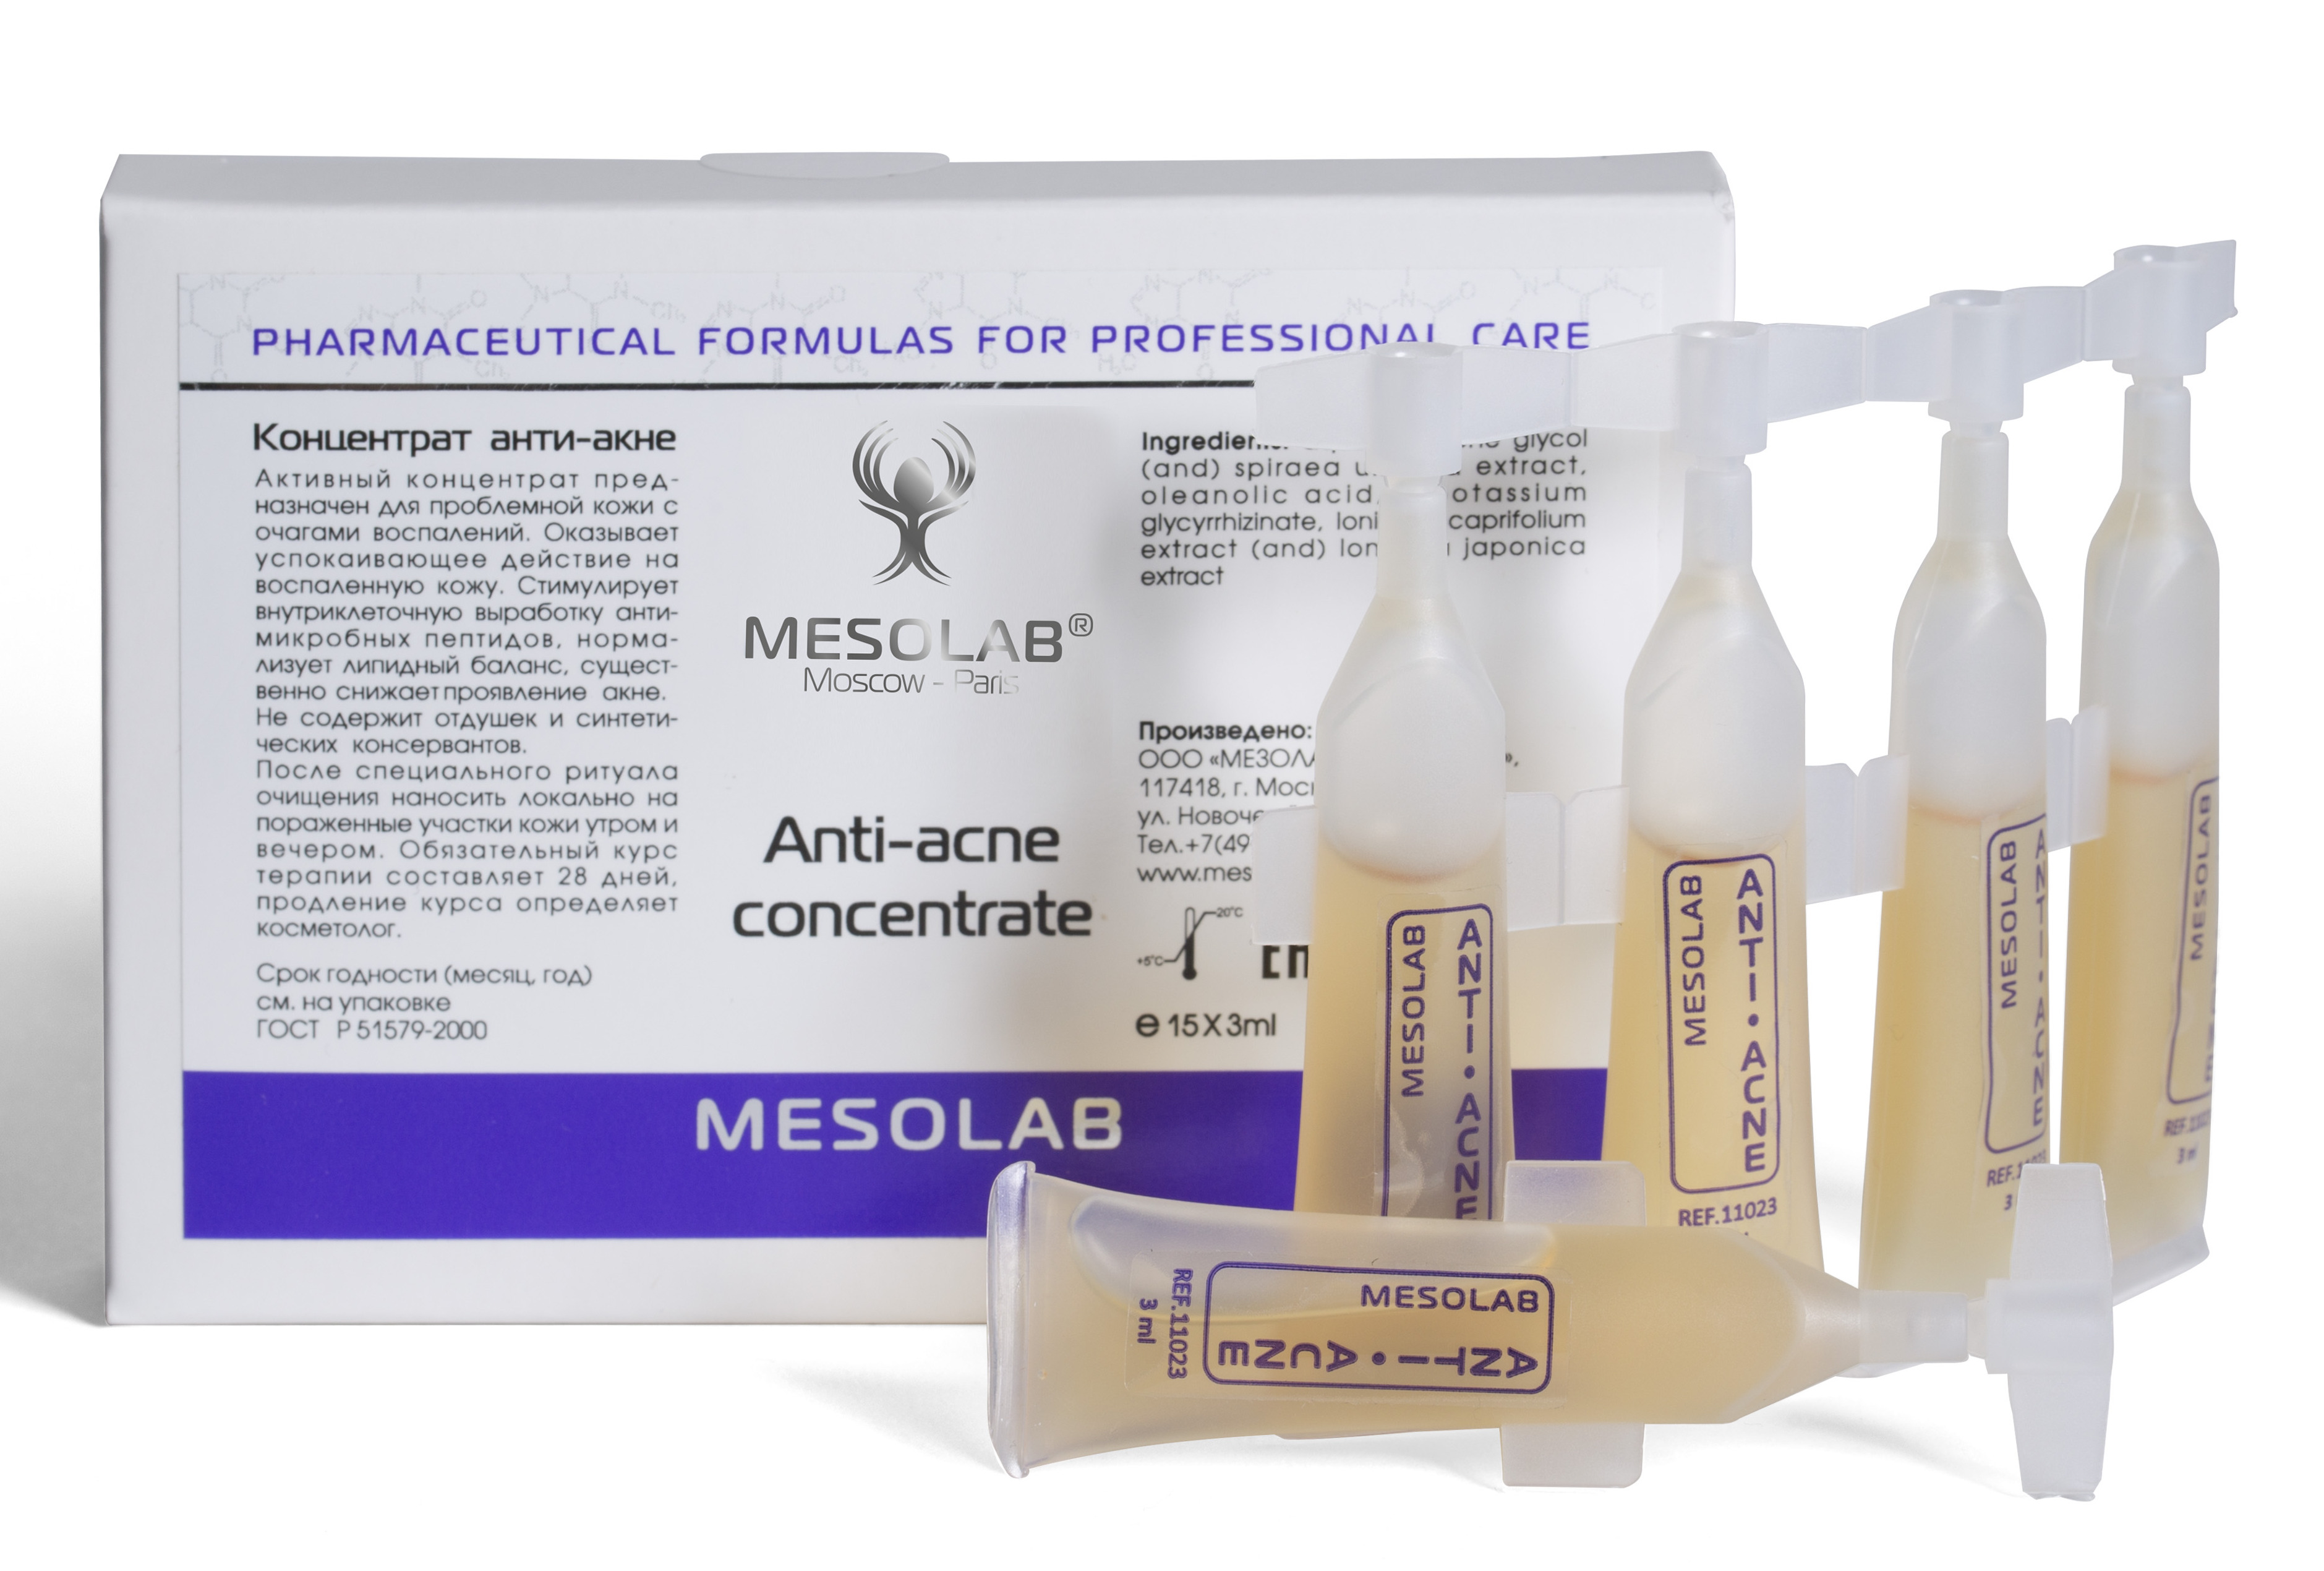 MESOLAB Концентрат анти-акне / ANTI-ACNE CONCENTRATE 10*3 мл